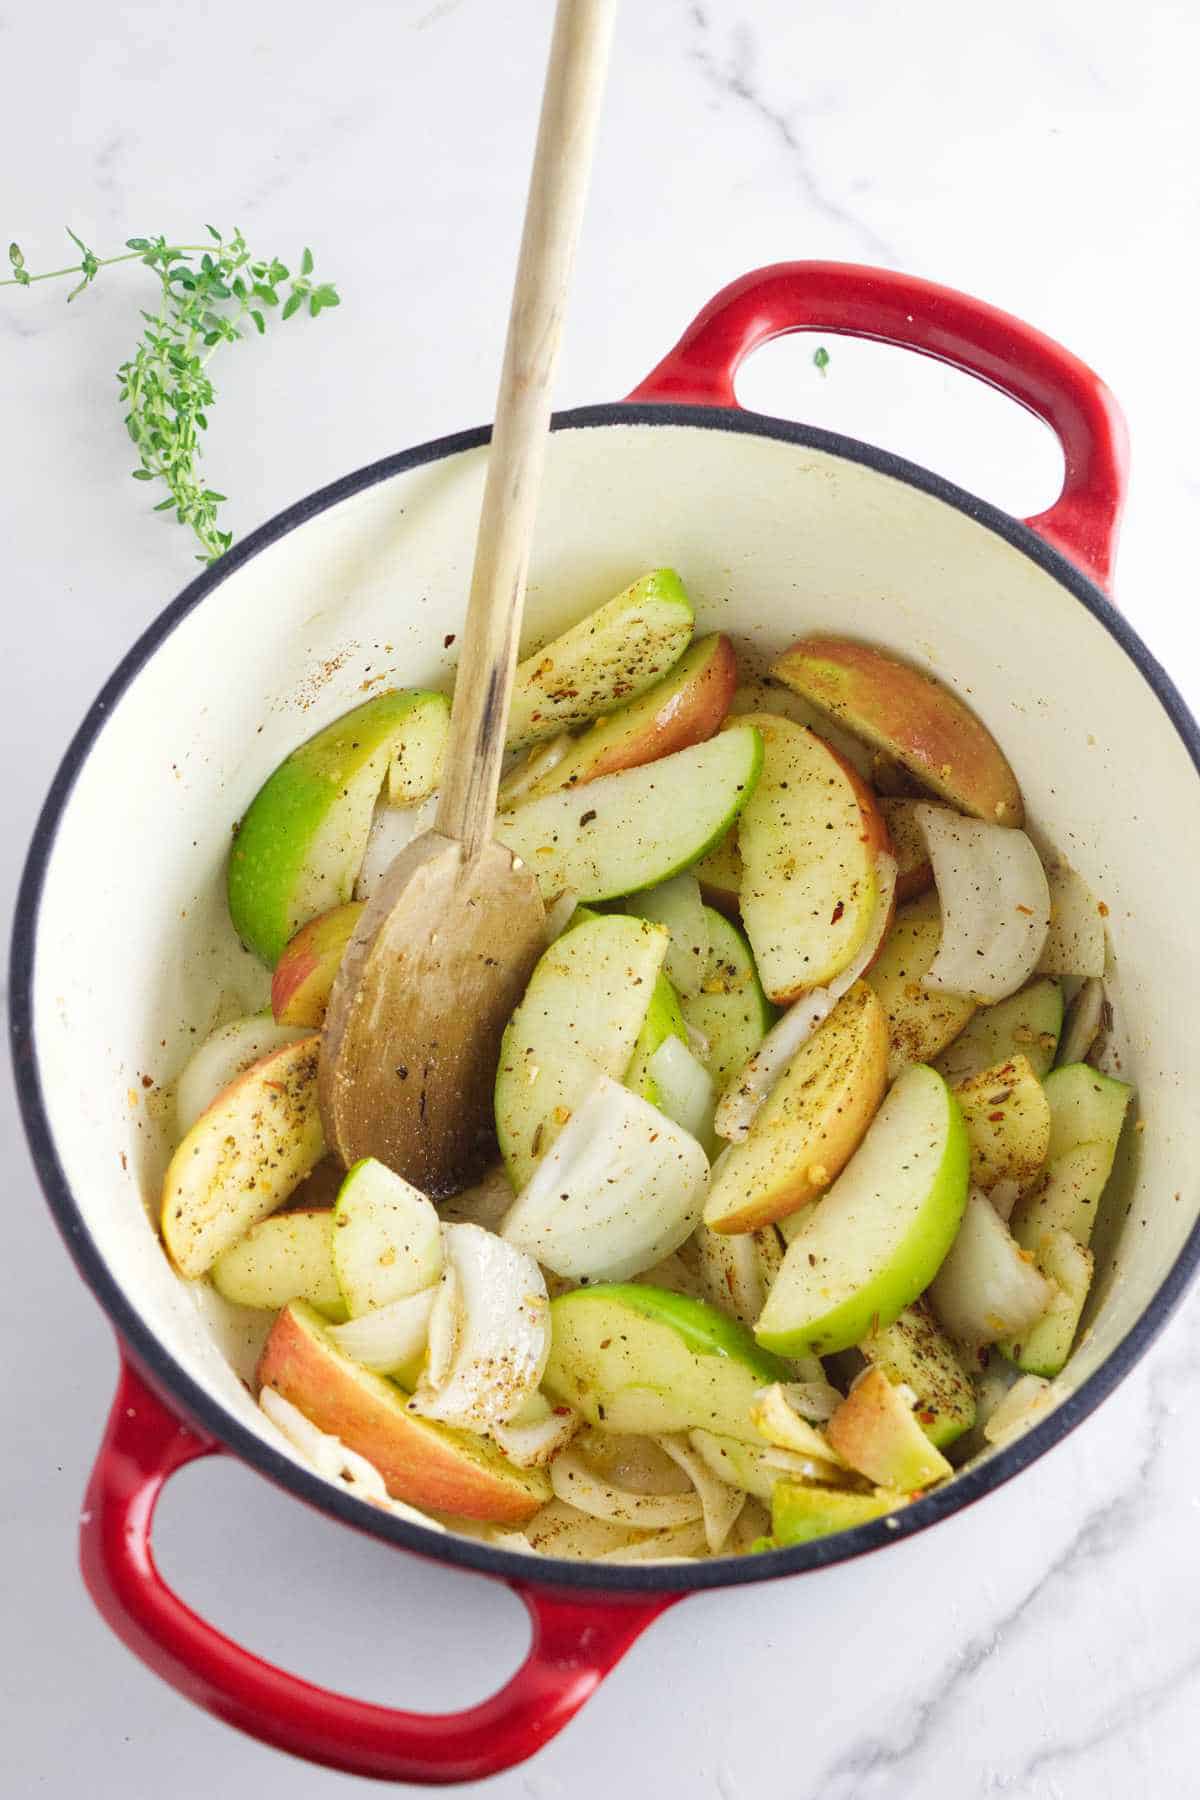 apples, onions, and garlic being sauteed in a pot.